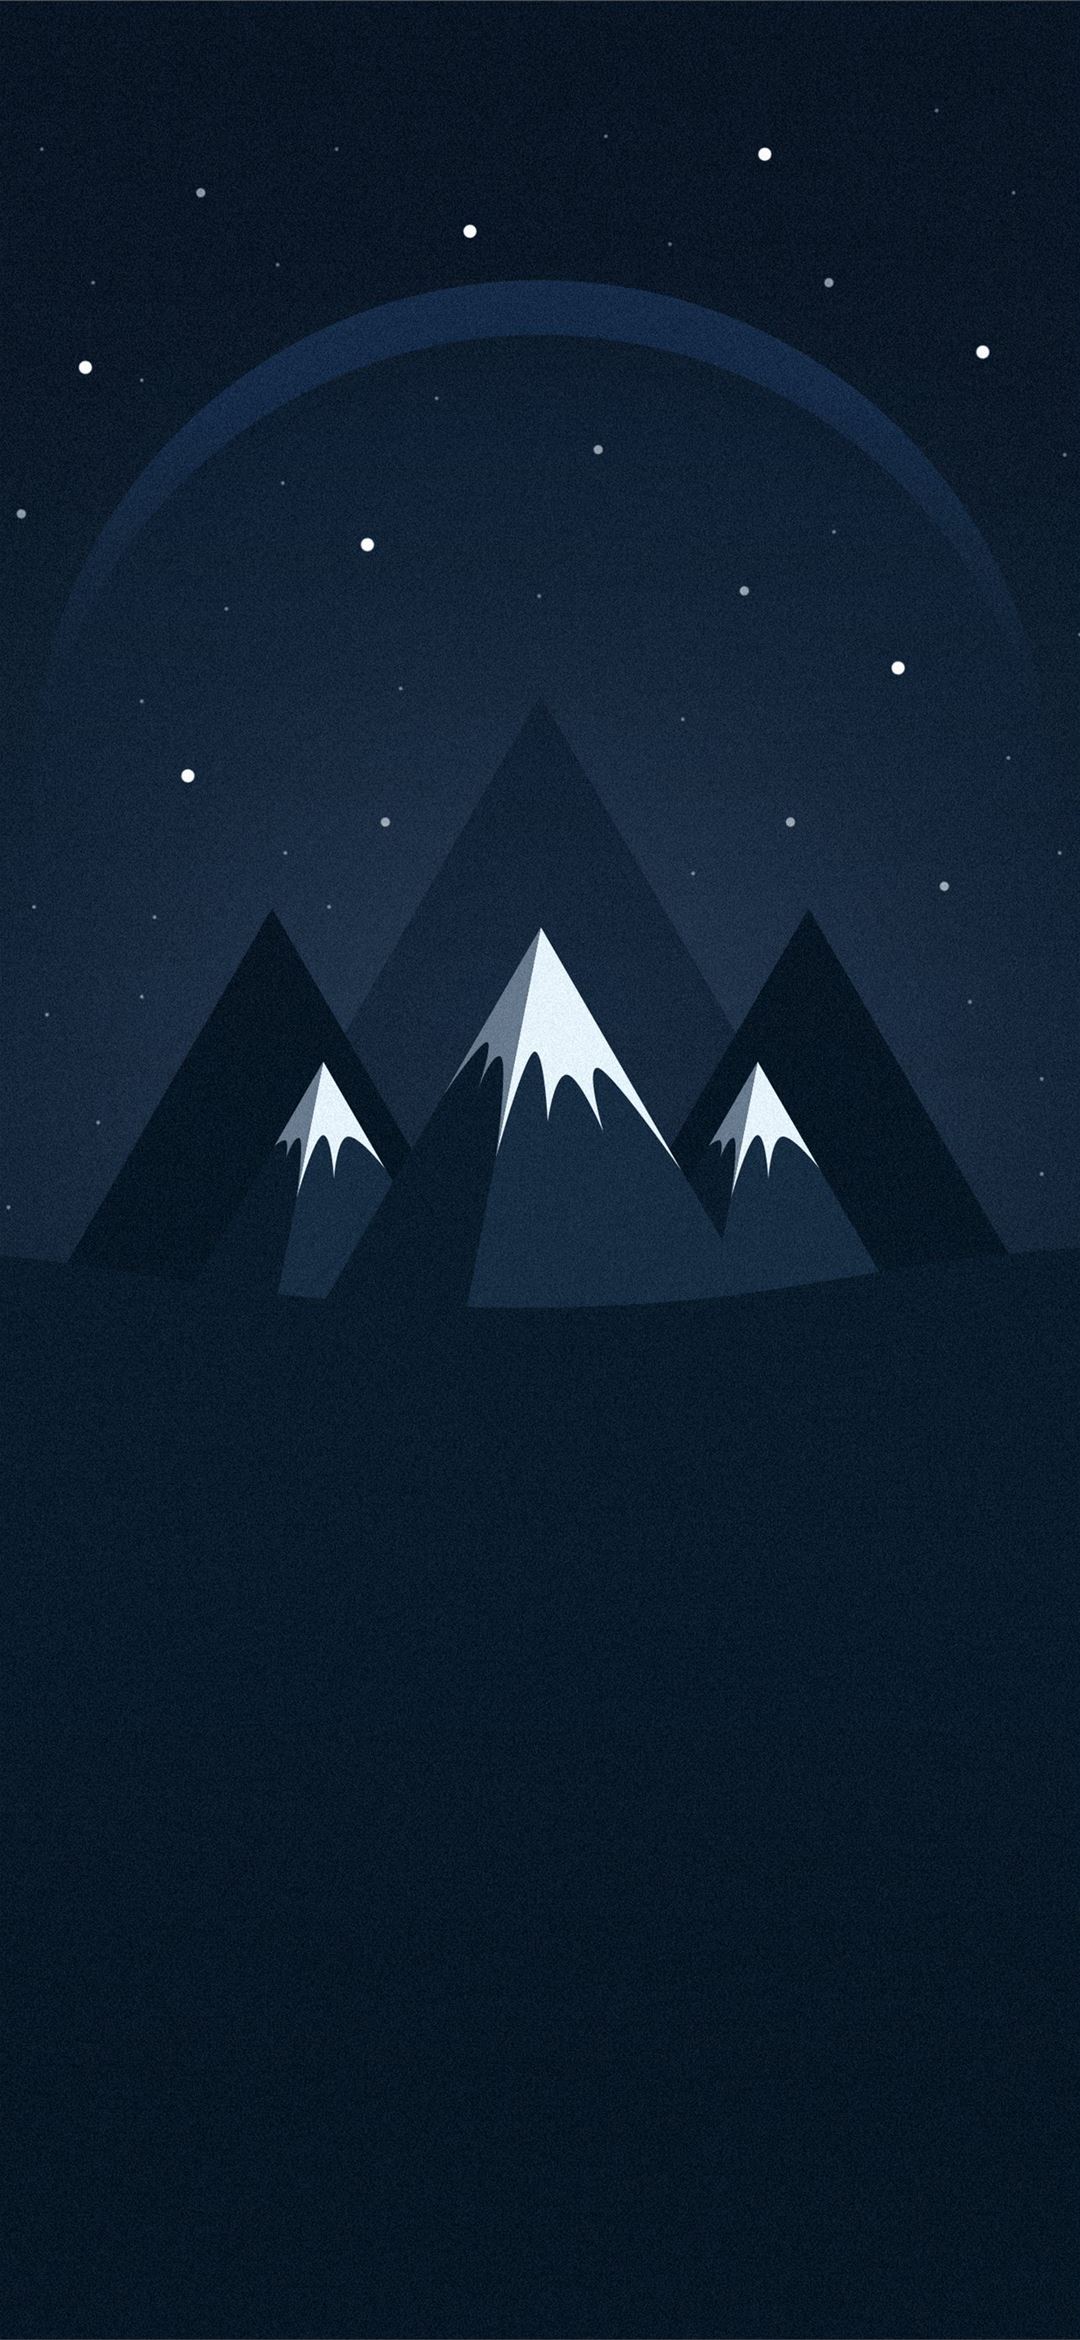 4K For Mobile Minimalist If you have your own one ... iPhone Wallpapers ...